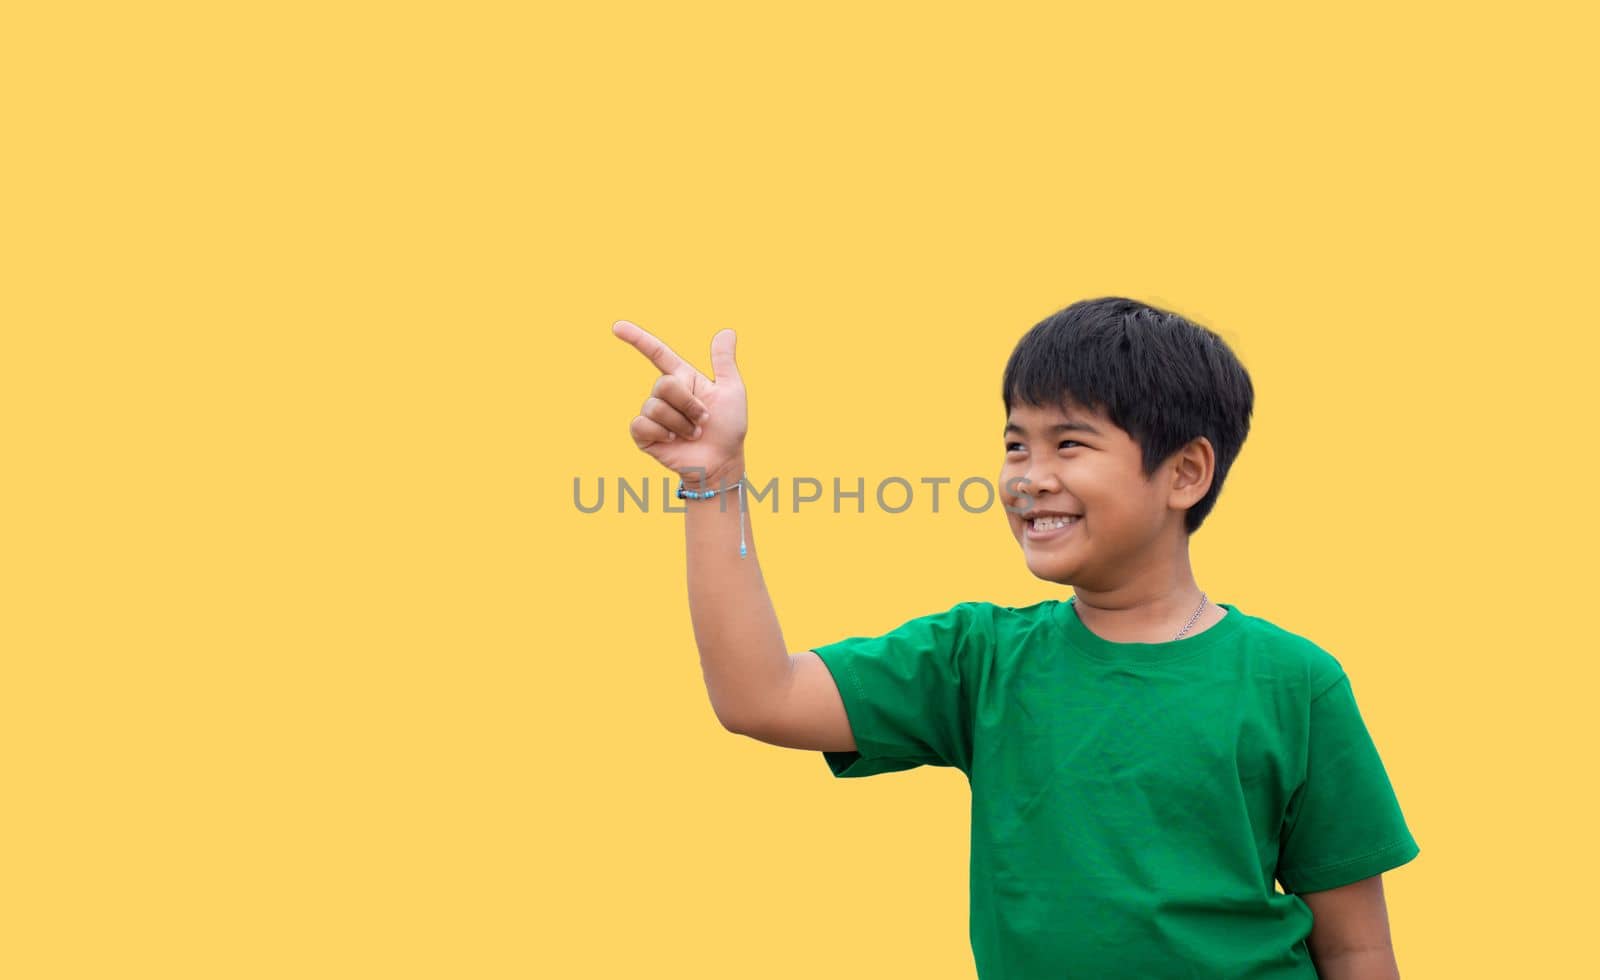 The boy smiled and pointed his hand to his side. on a yellow background by Unimages2527